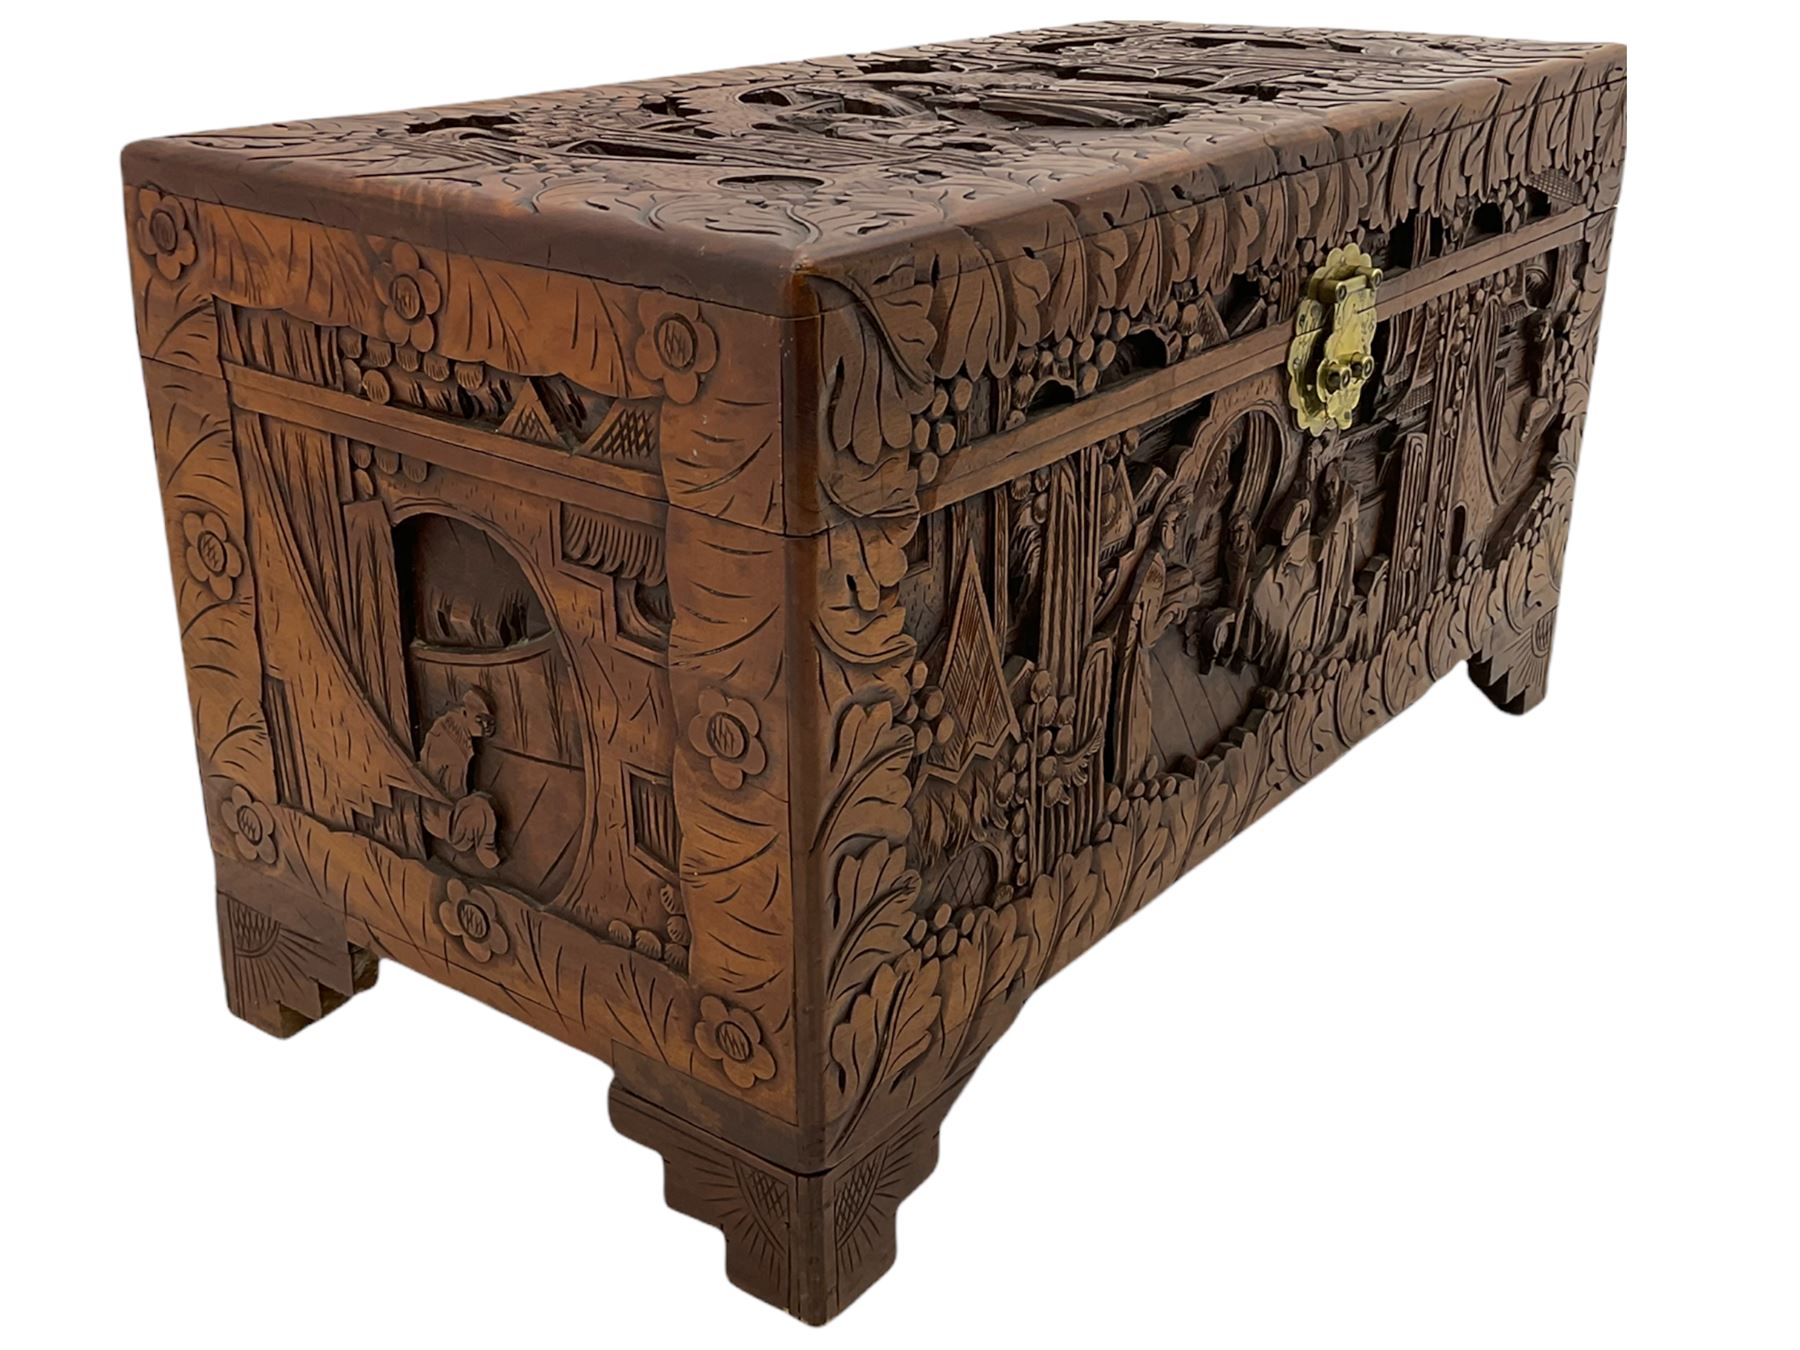 Chinese carved camphor wood blanket chest - Image 3 of 6